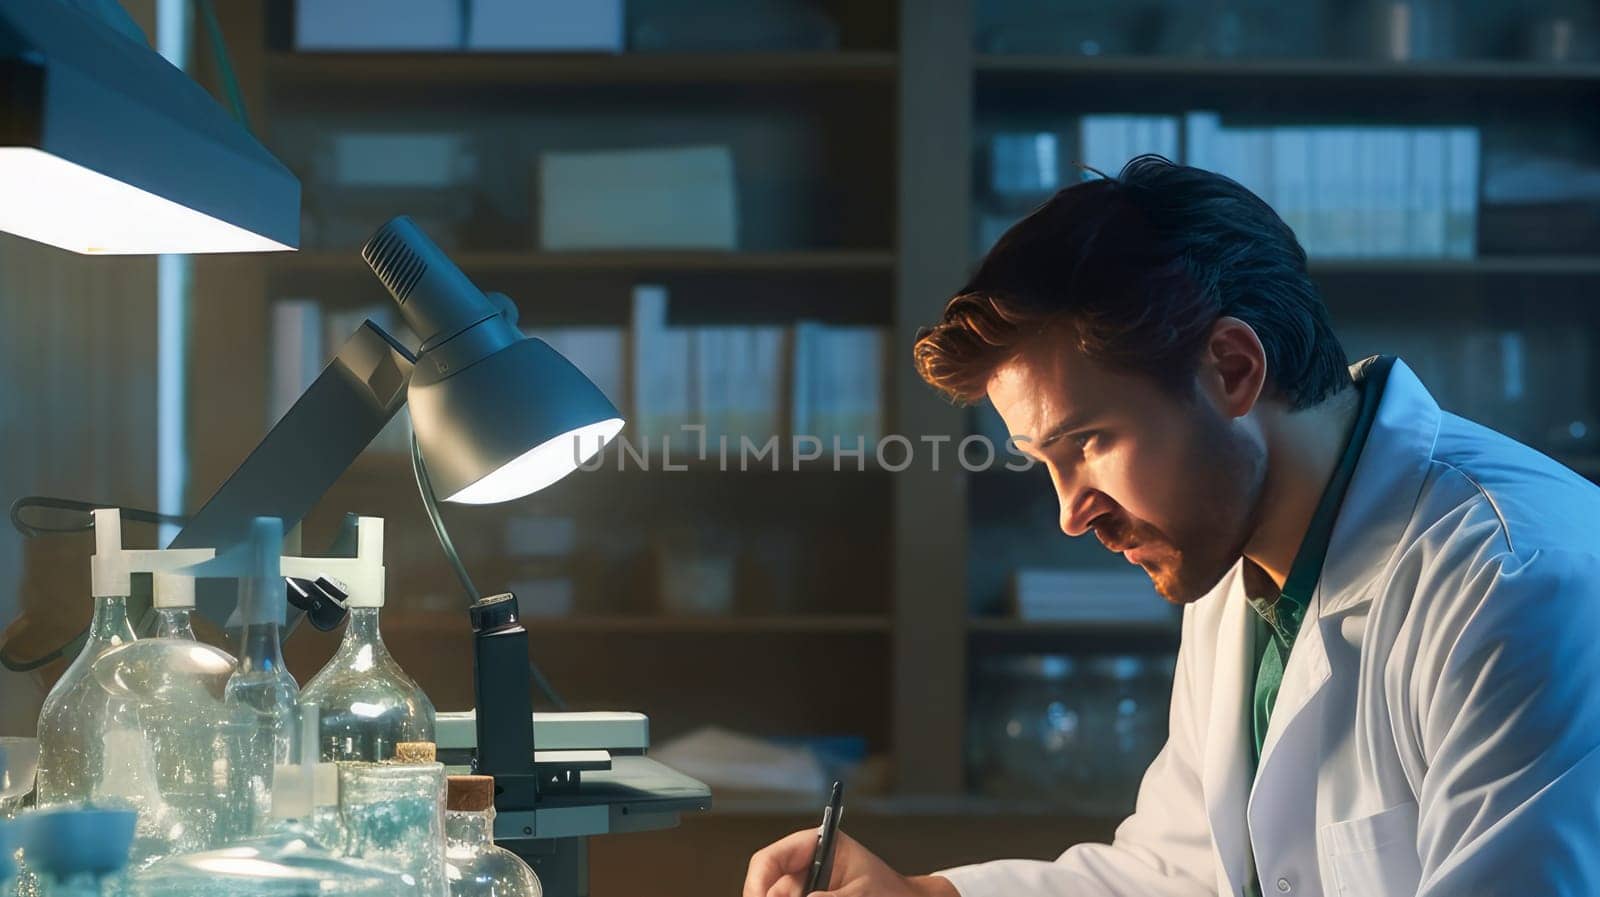 A doctor in his office and a modern medical laboratory where a person is undergoing examination of his health. Hospital, medicine, doctor and pharmaceutical company, healthcare and health insurance